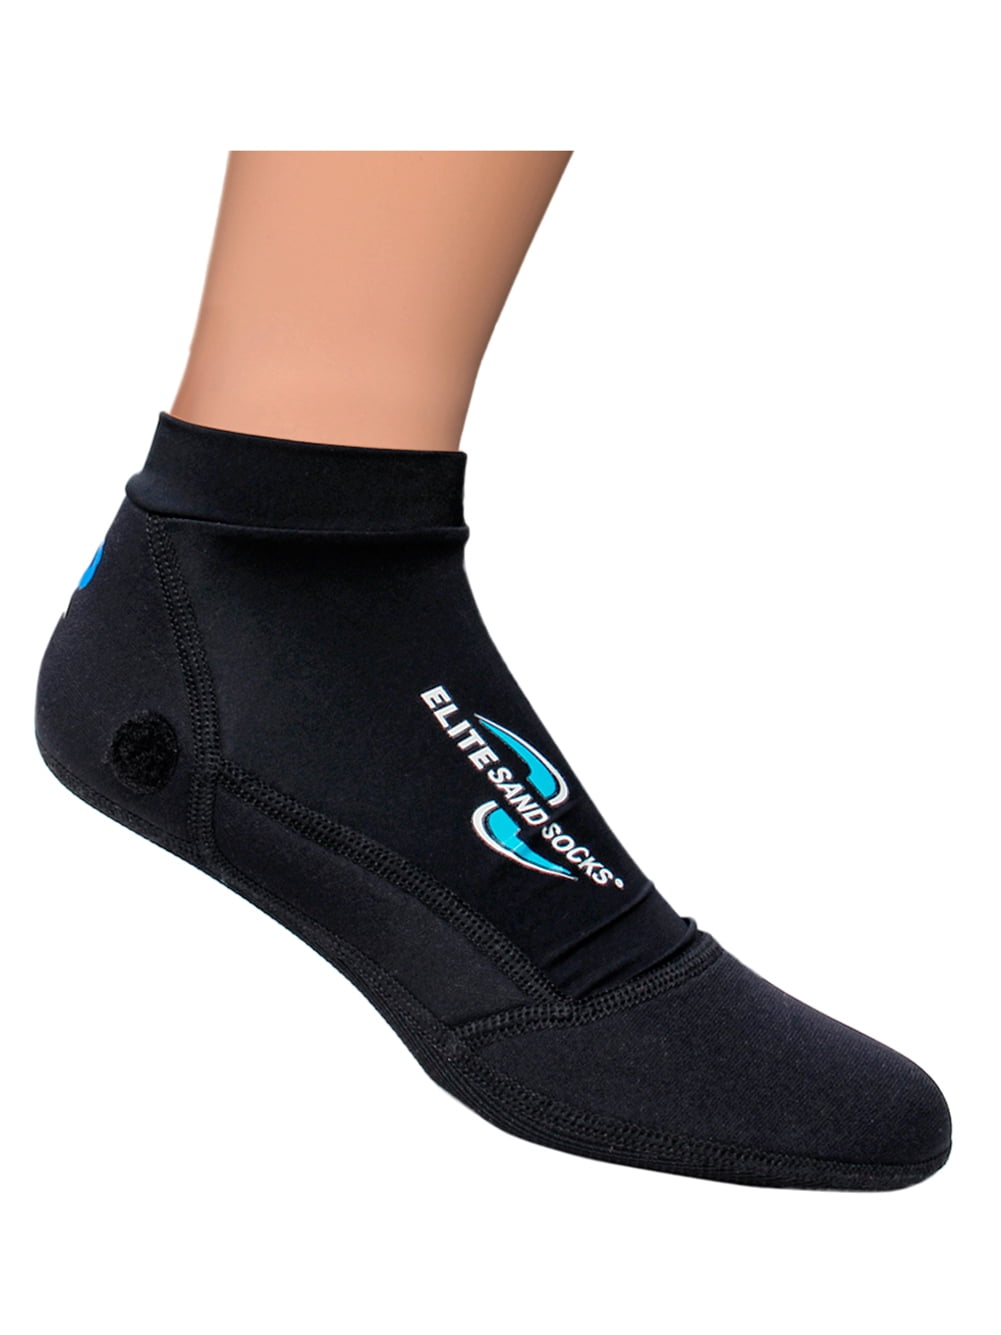 VINCERE Sand Socks for Beach Volleyball Soccer Snorkeling Diving Black XXS for sale online 